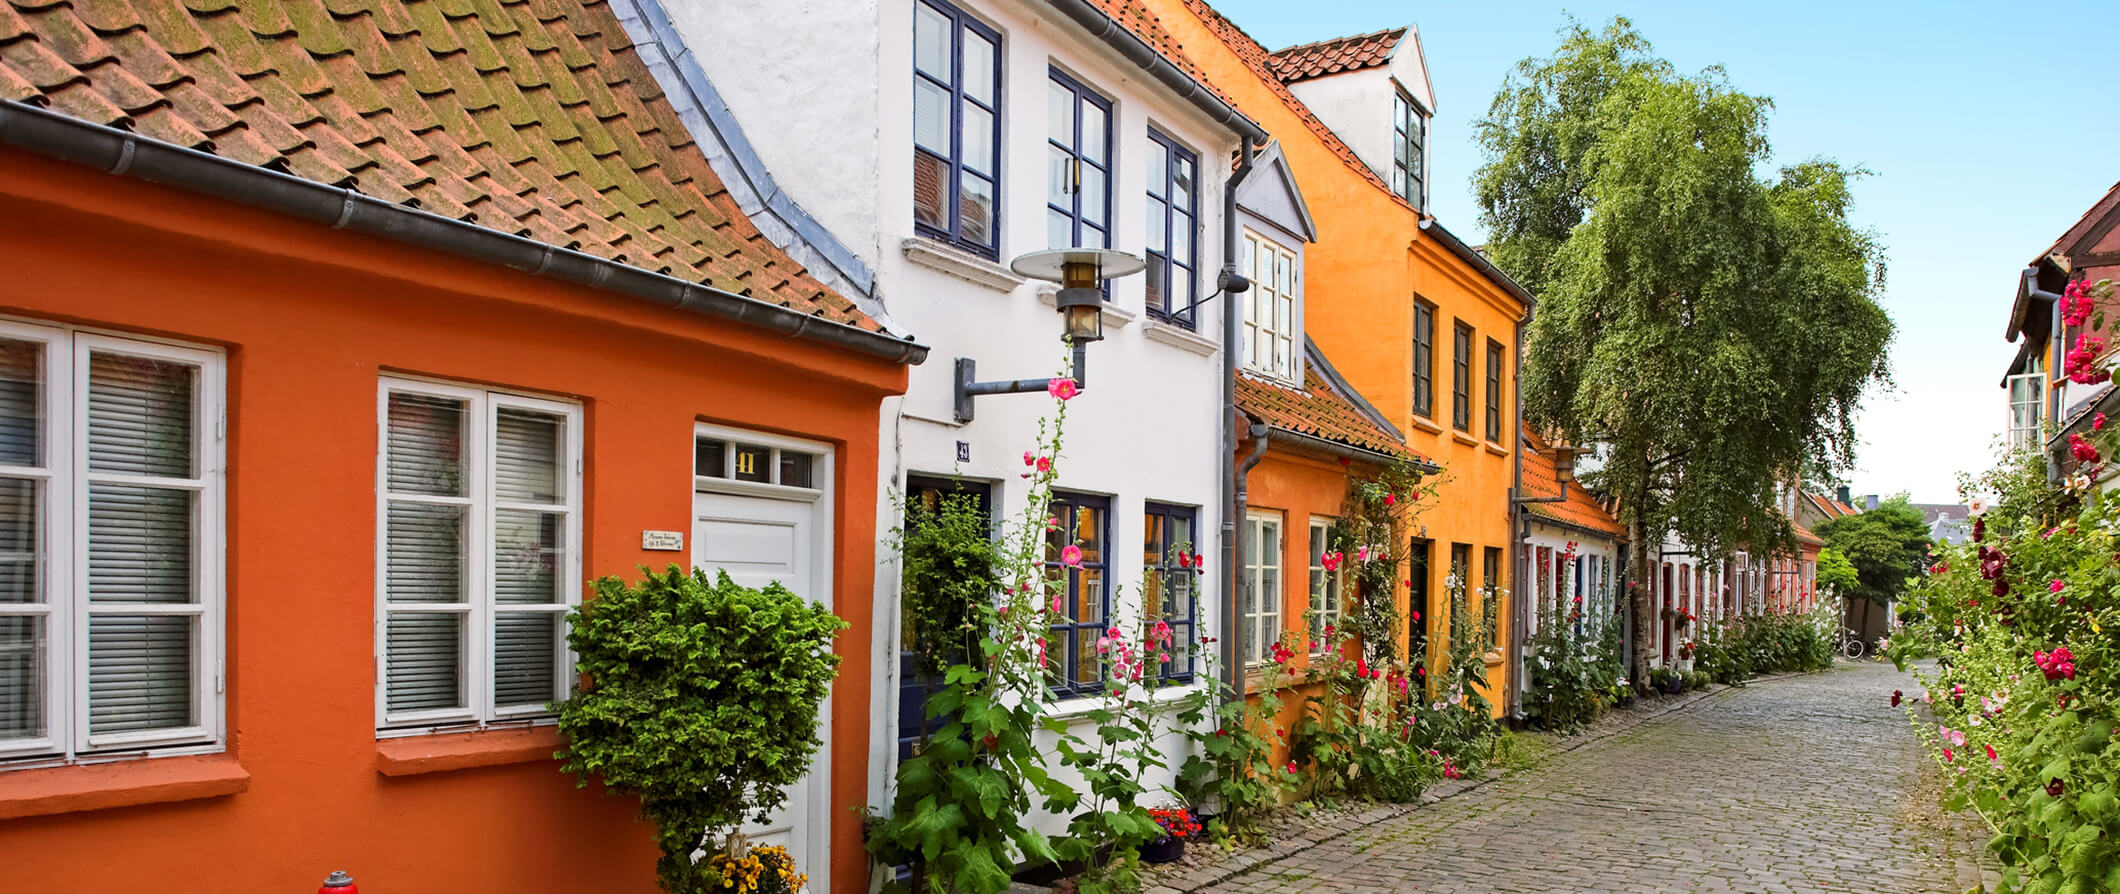 Old colorful Danish houses on a cobbled street